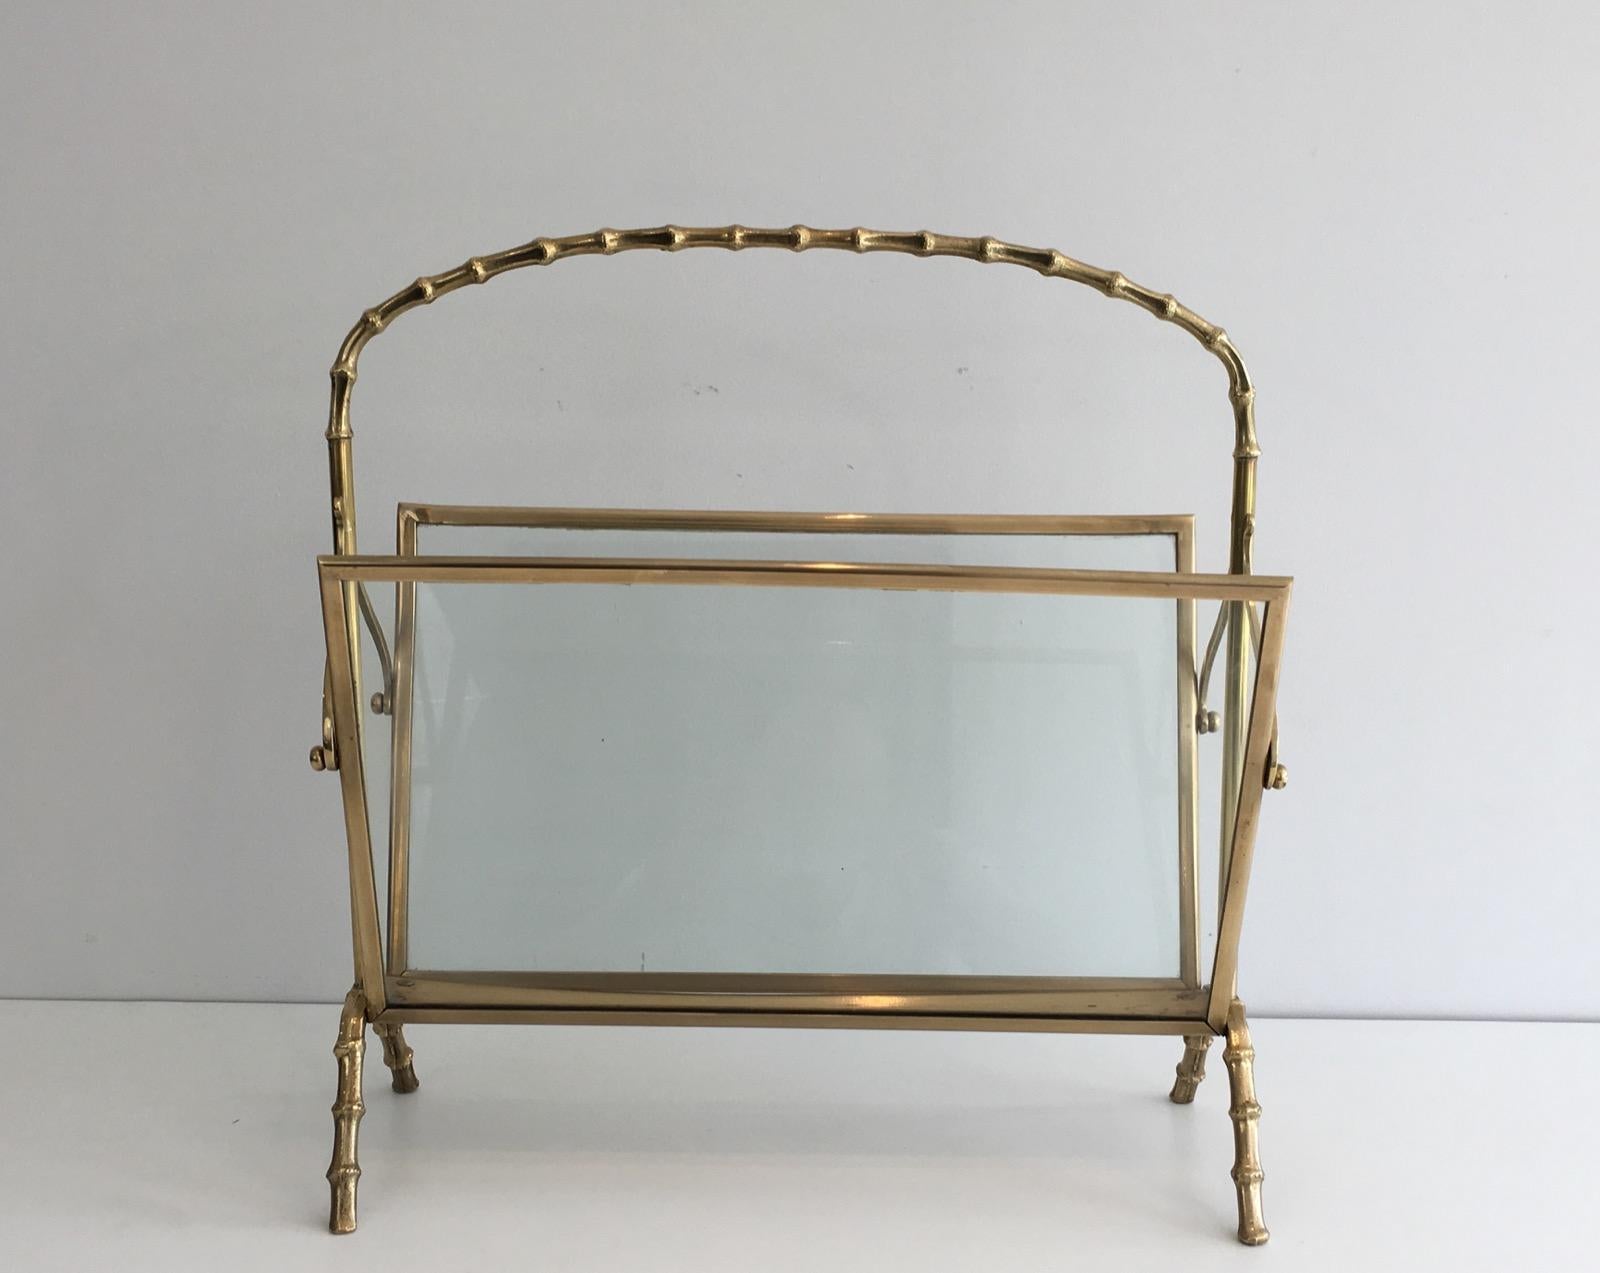 This faux-bamboo magazine rack is made of bra-onze and brass with clear glass panels on each side. This is a French work by Maison Baguès. Circa 1940